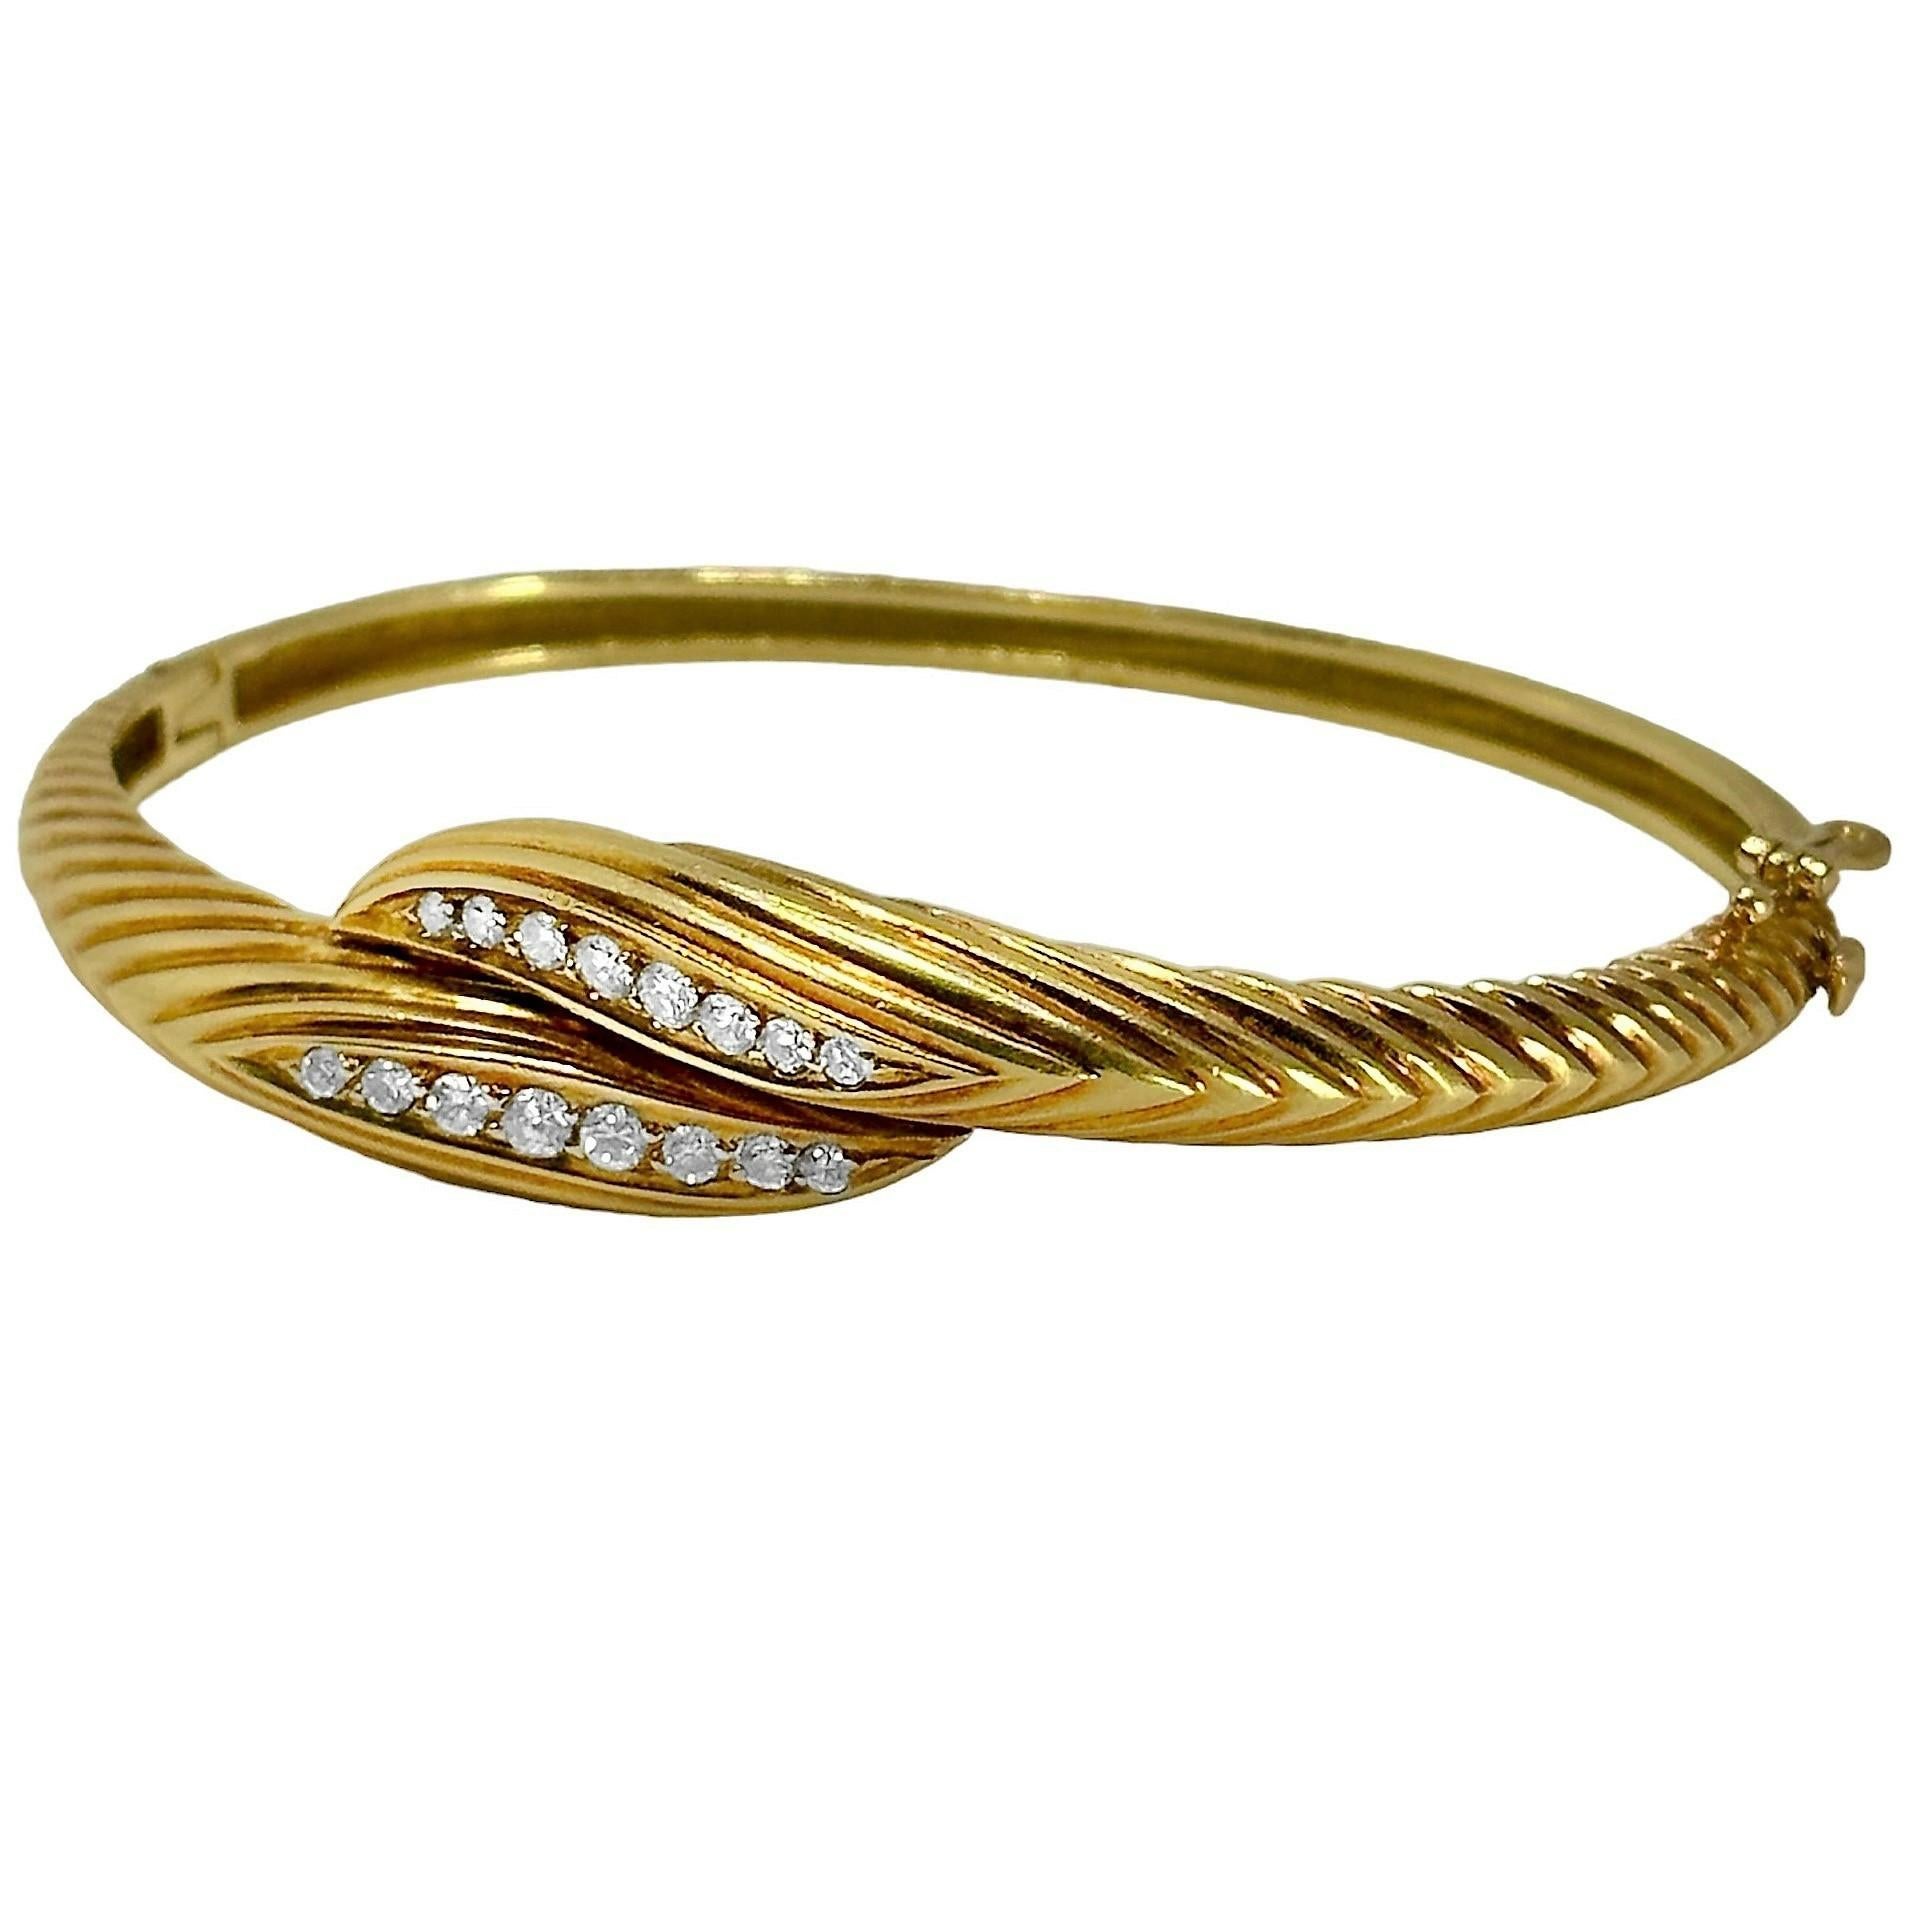 Modern Delicate Vintage French Mid-20th Century Gold and Diamond Bangle Bracelet For Sale